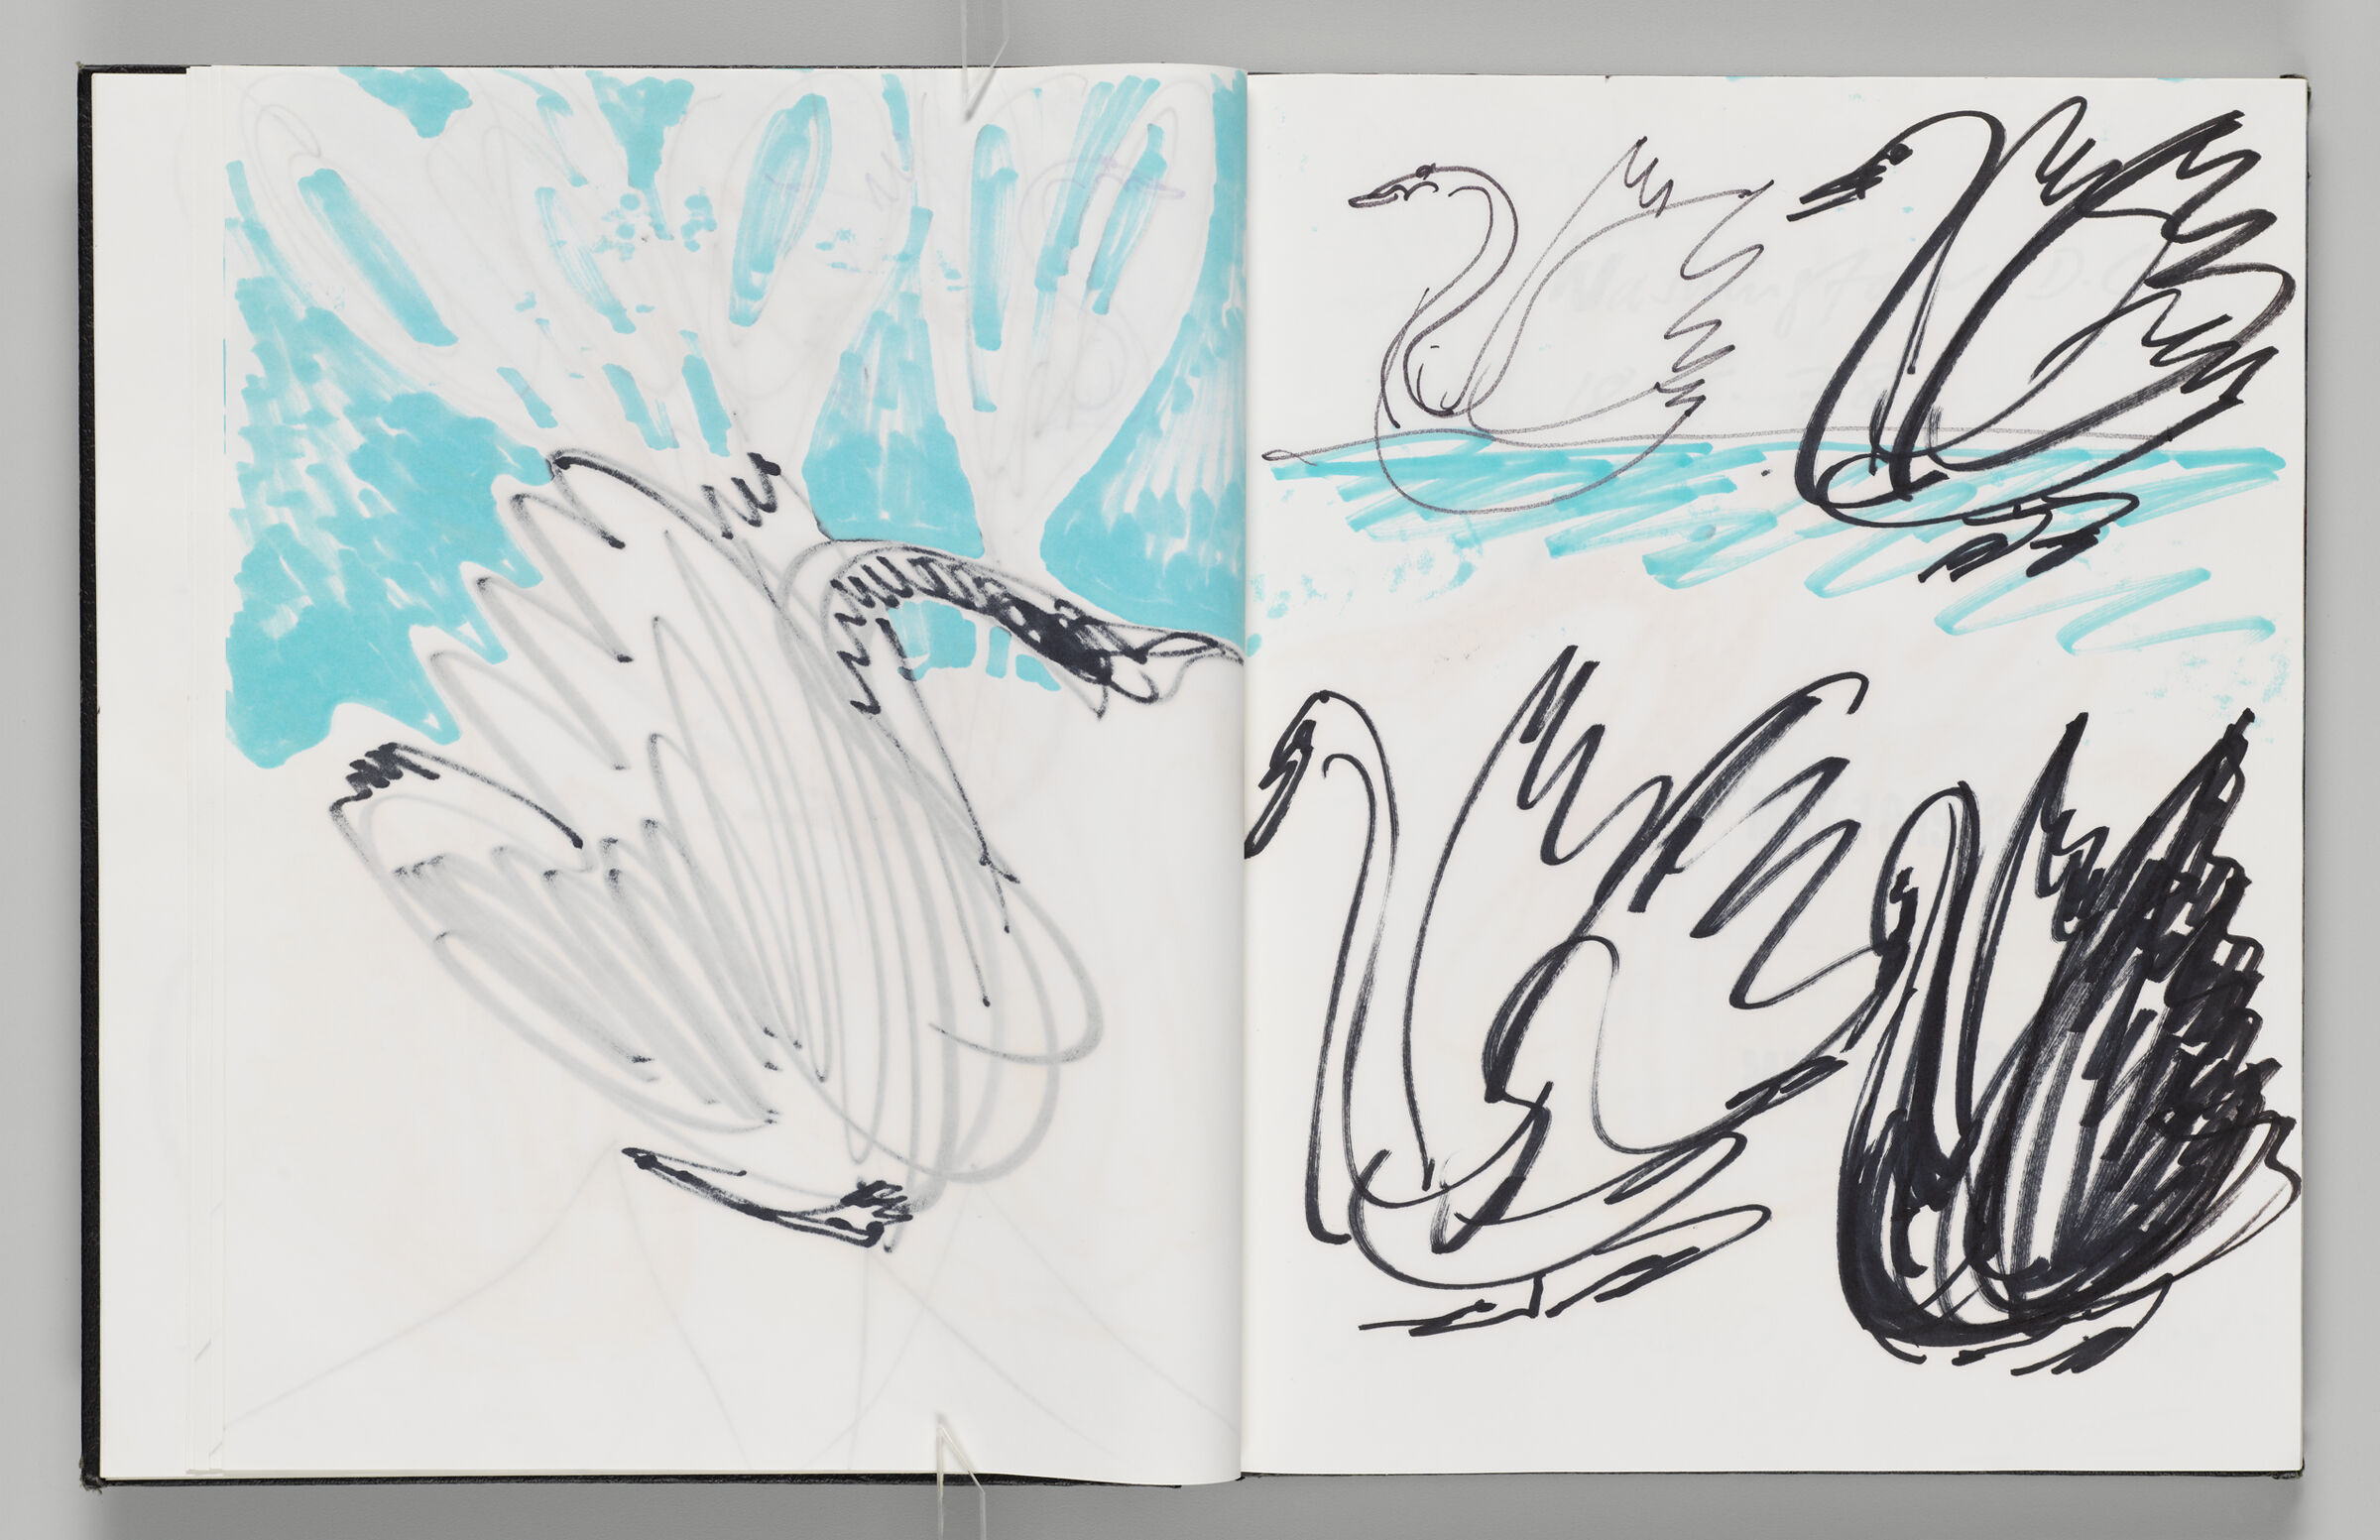 Untitled (Bleed-Through Of Previous Page, Left Page); Untitled (Black Swan Inflatable Against Aqua Sky, Right Page)